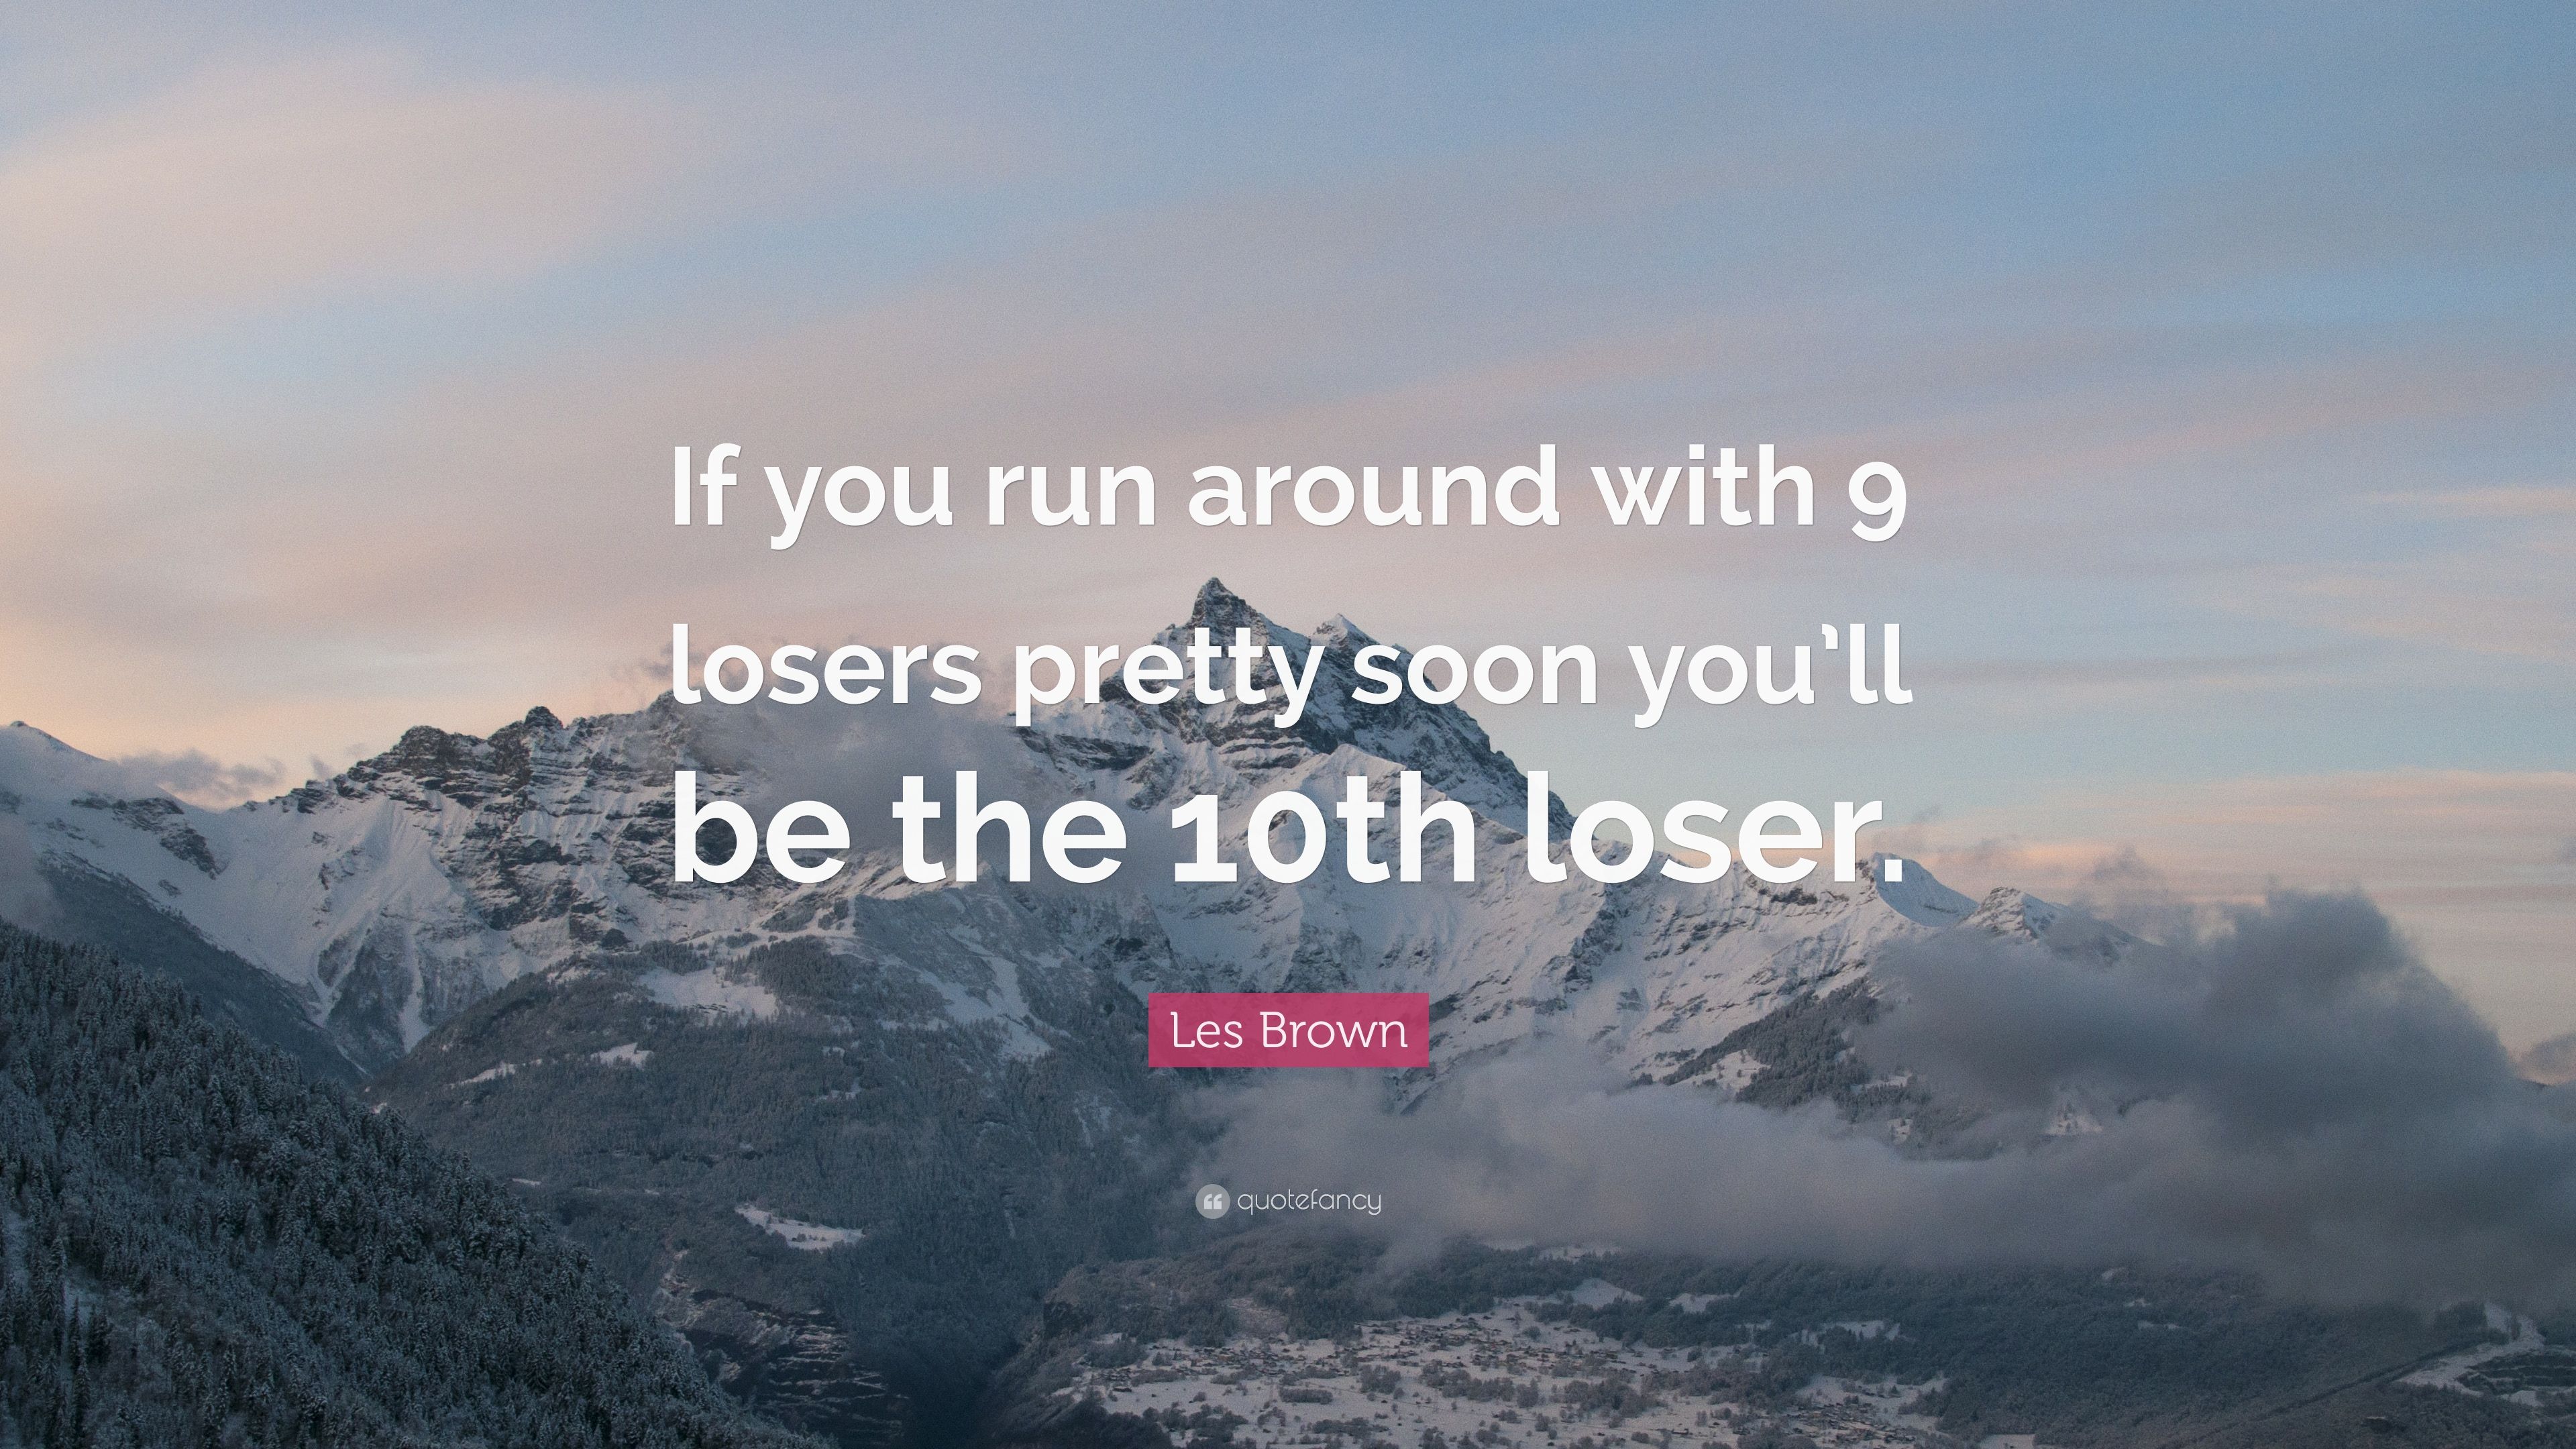 Les Brown Quote: “If you run around with 9 losers pretty soon you